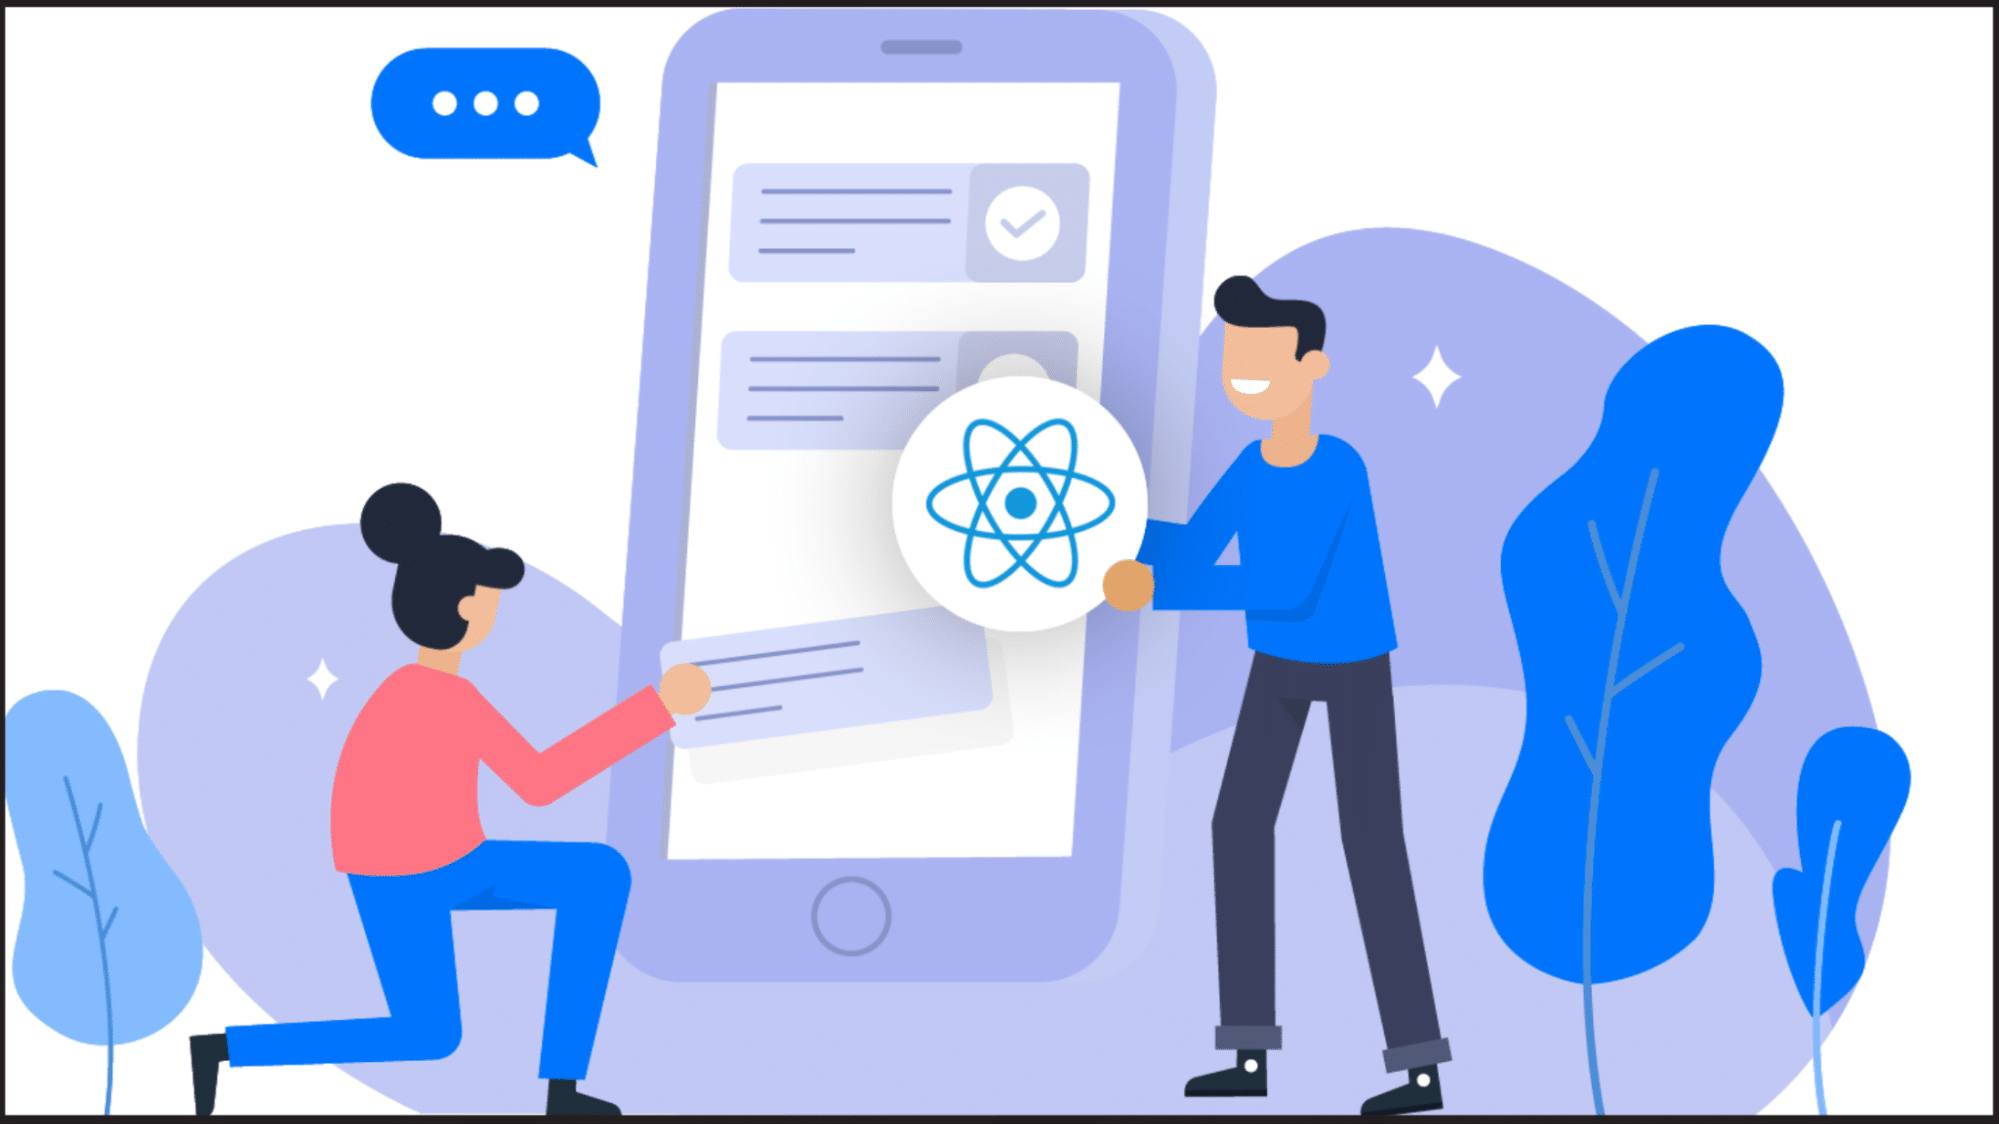 Reactjs For Your Business